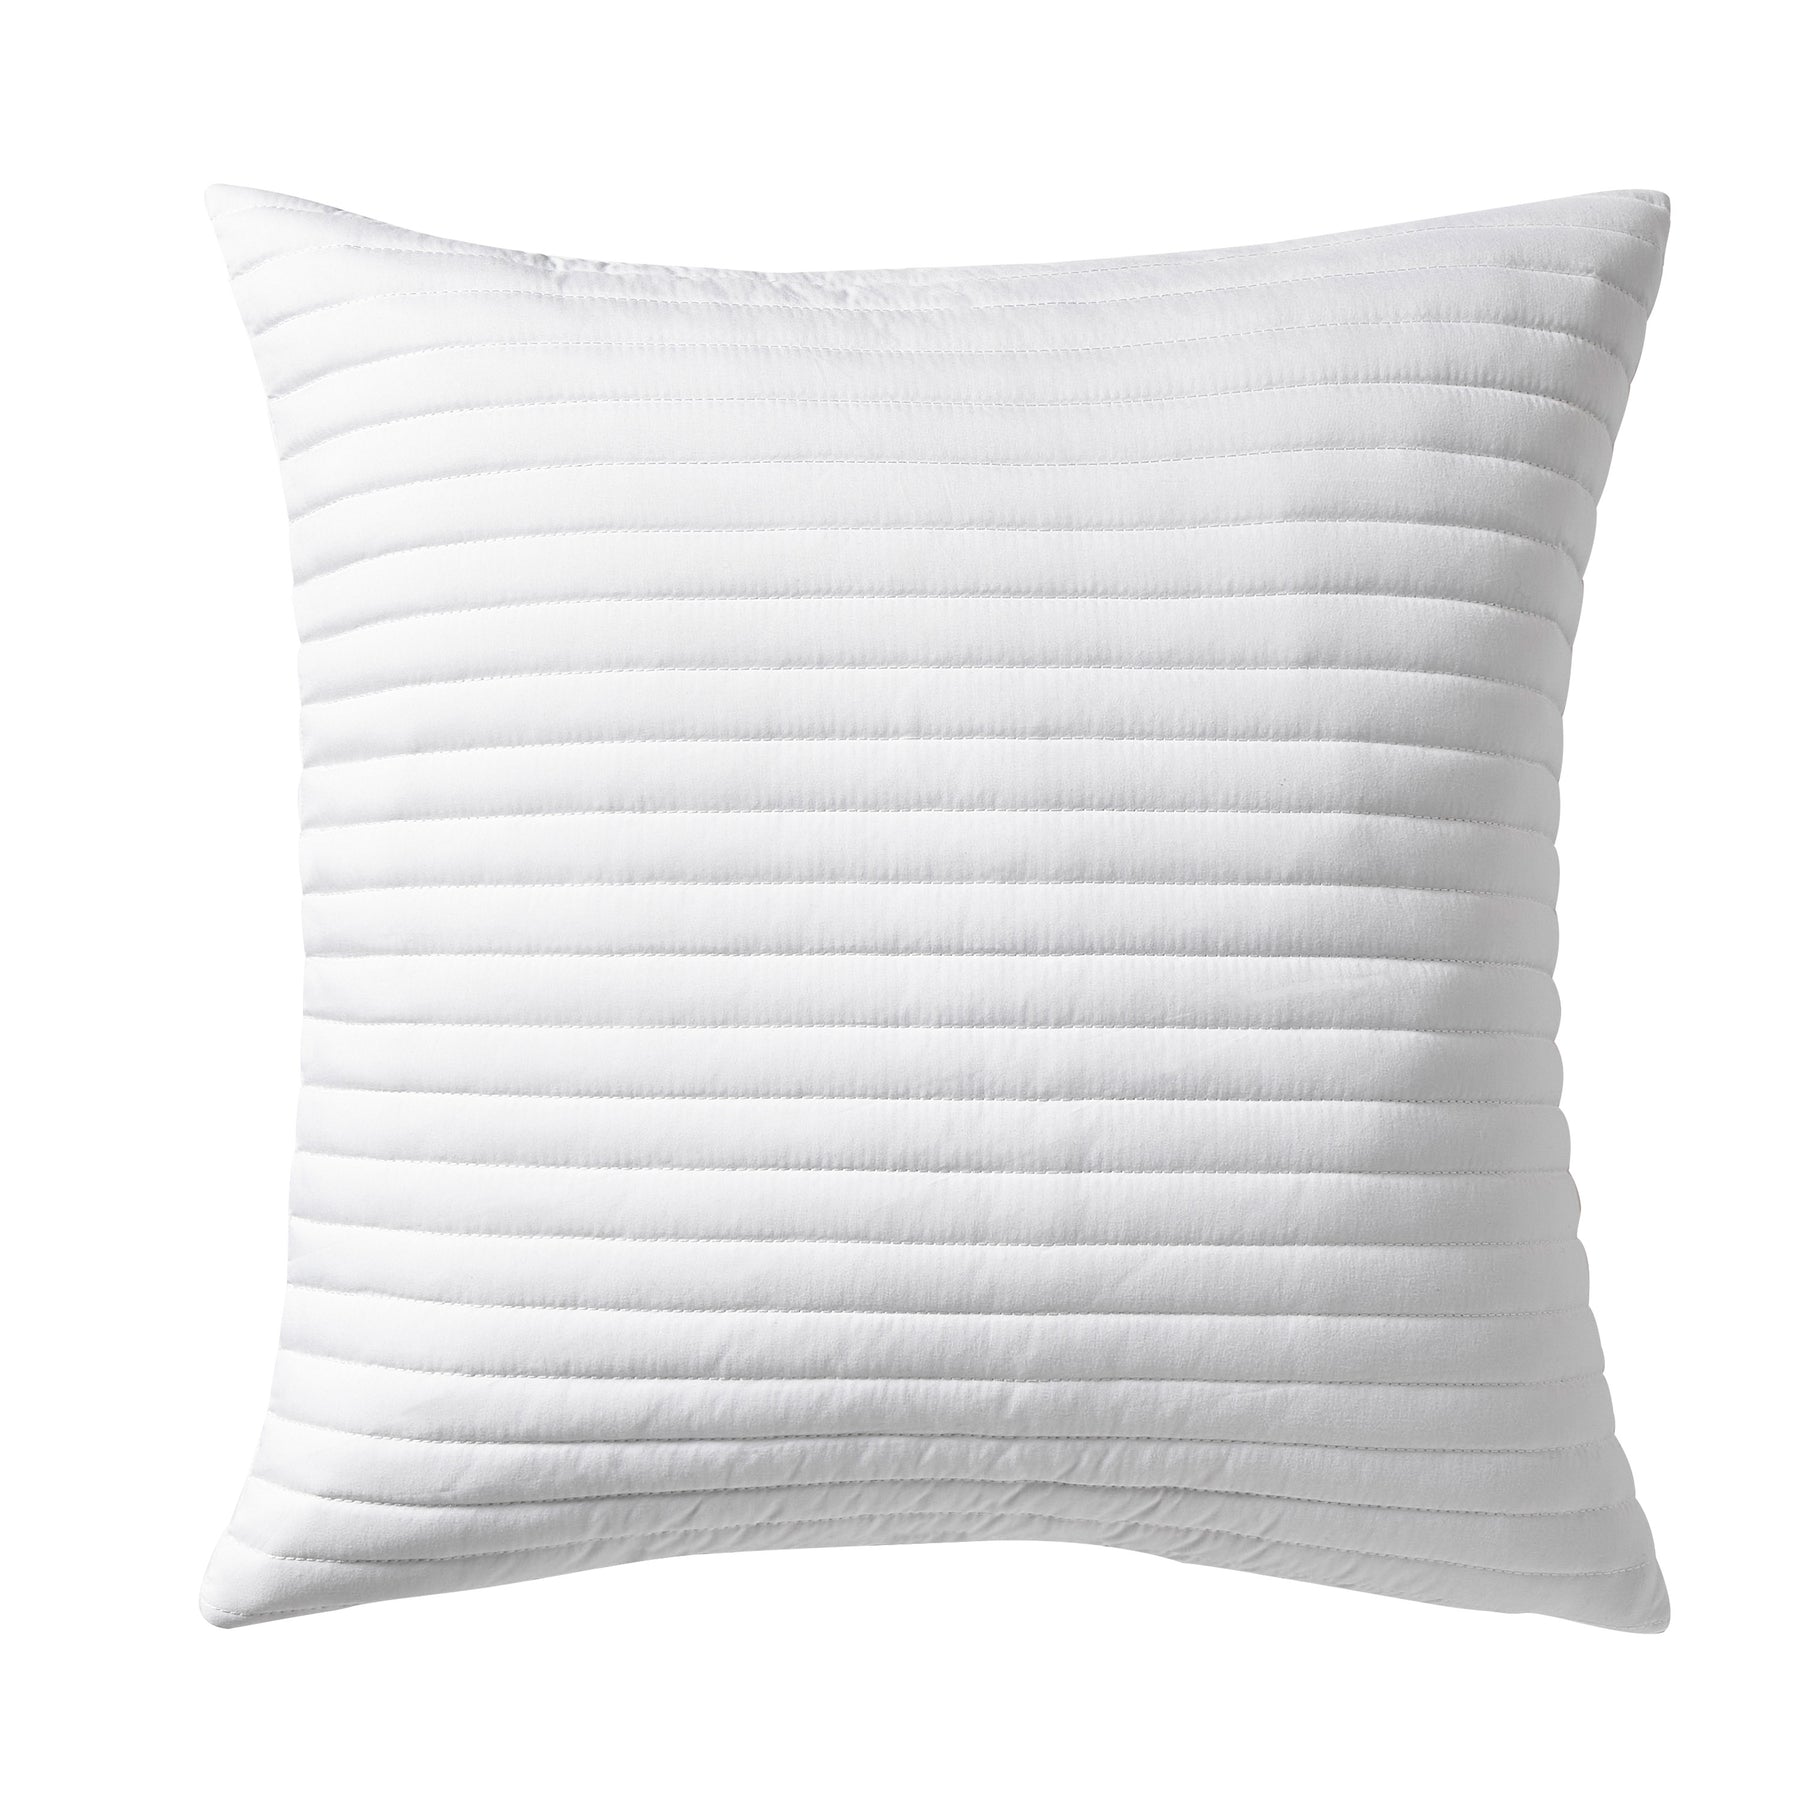 Bianca Quilted Lines Filled Cushion 55cm 55cm White